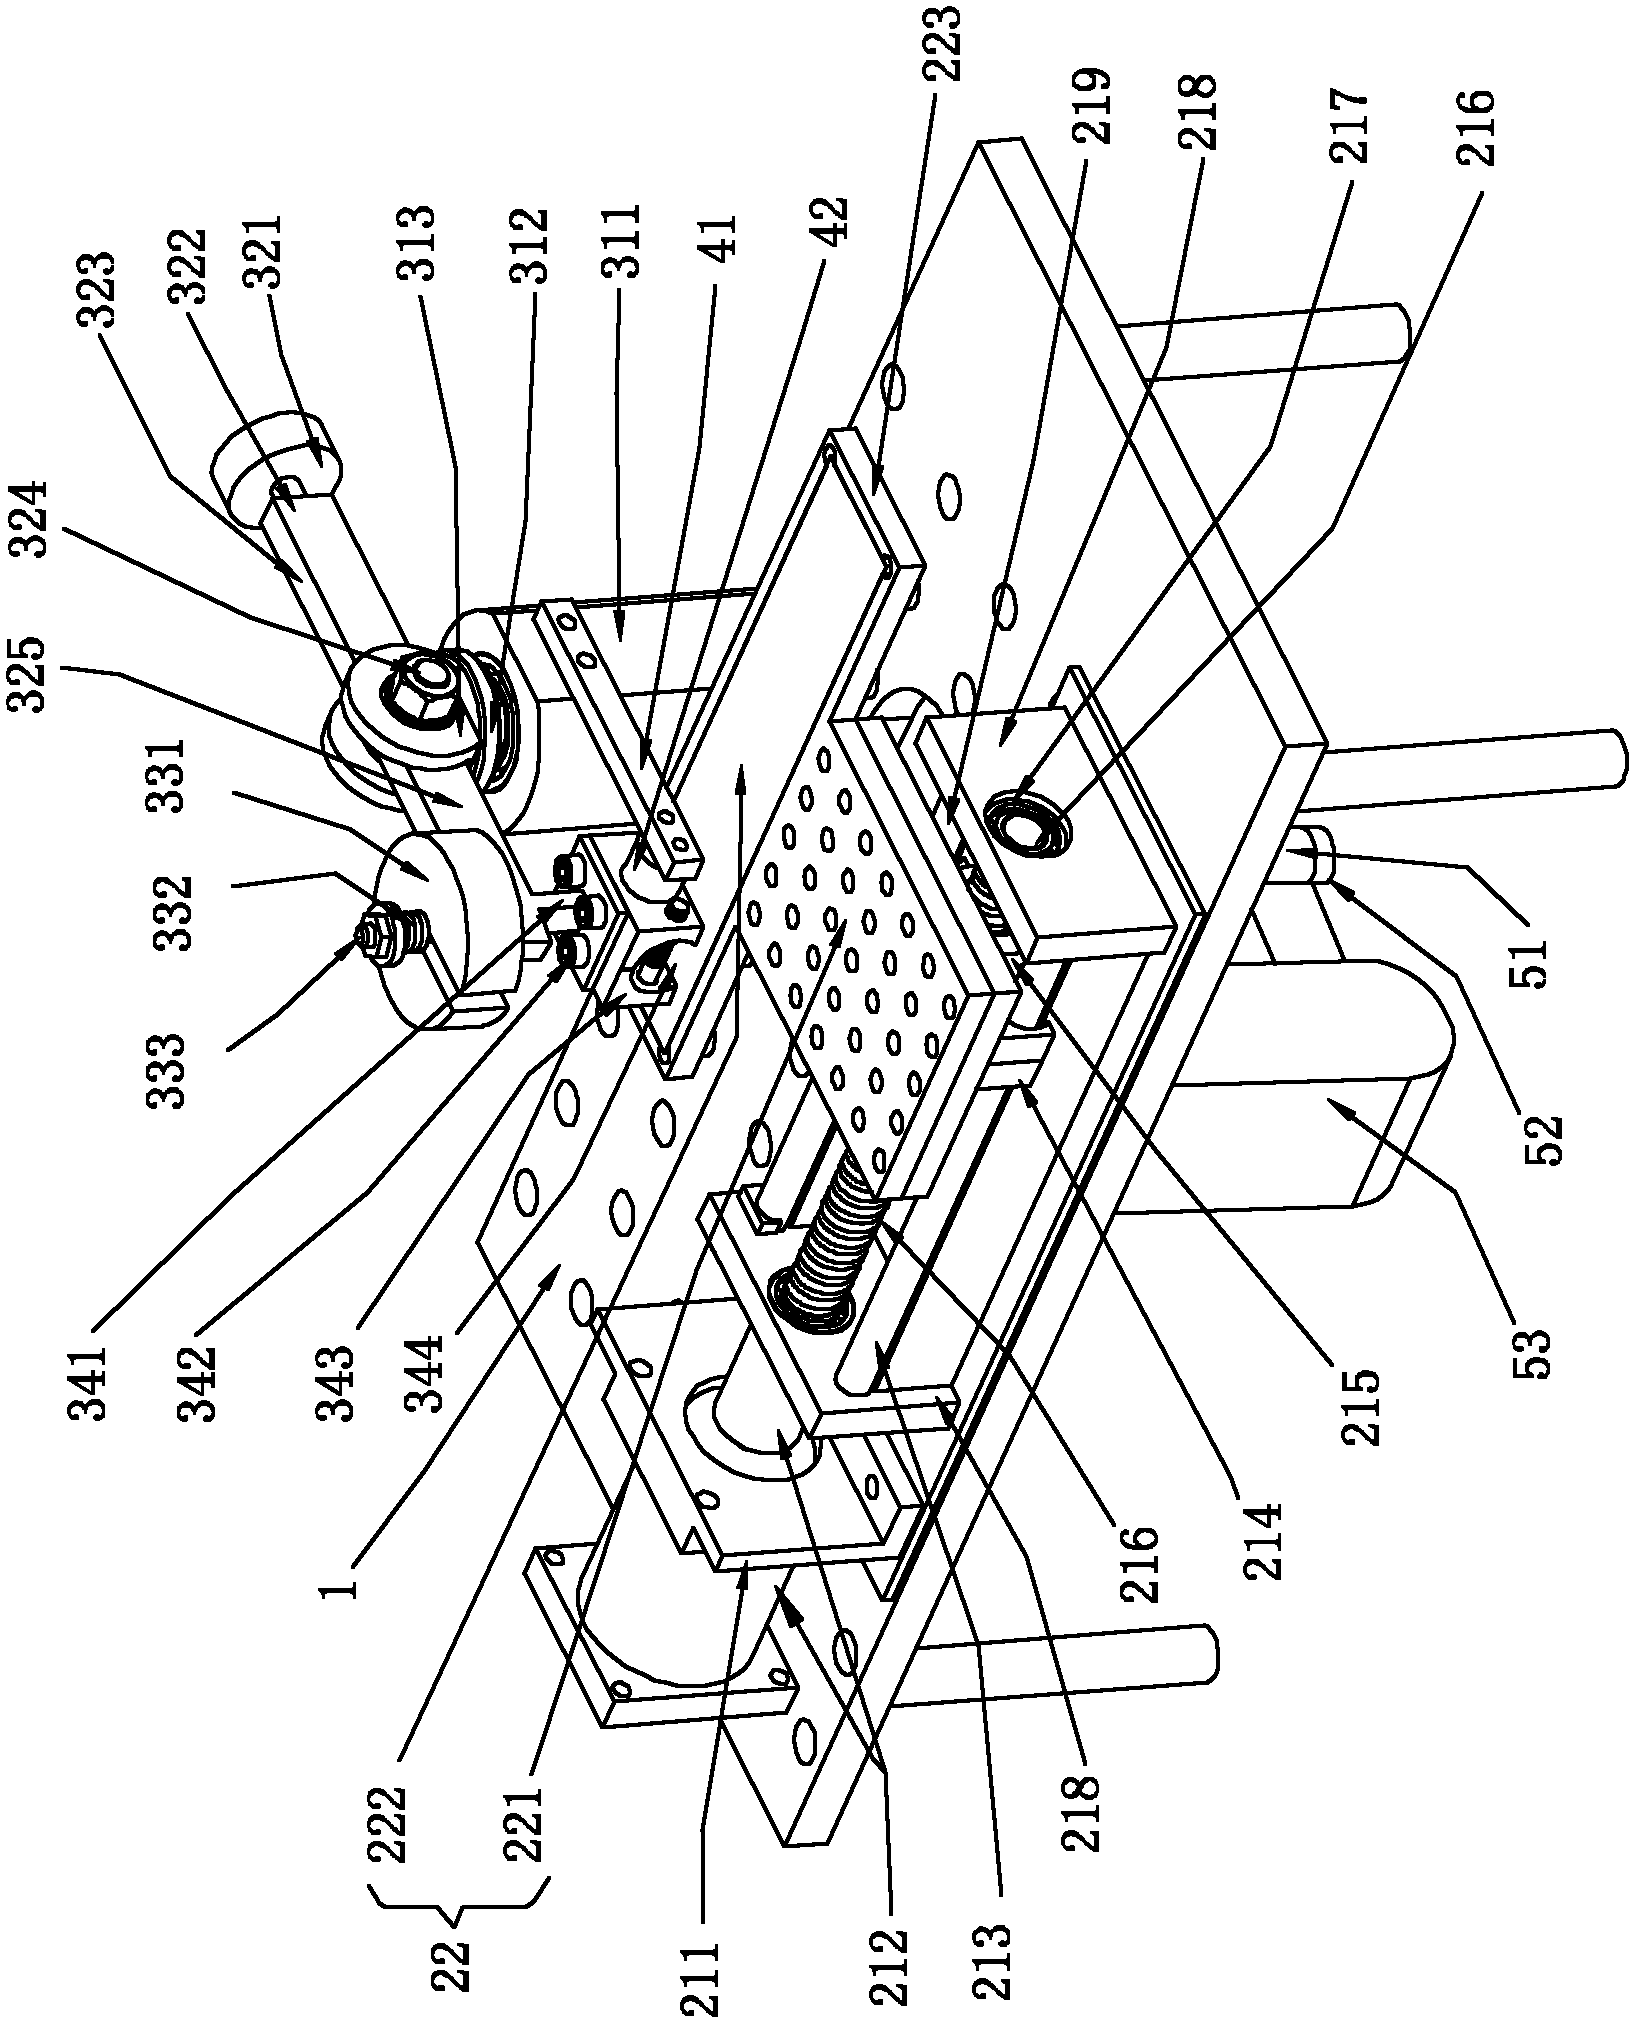 Direct-acting soft friction testing apparatus